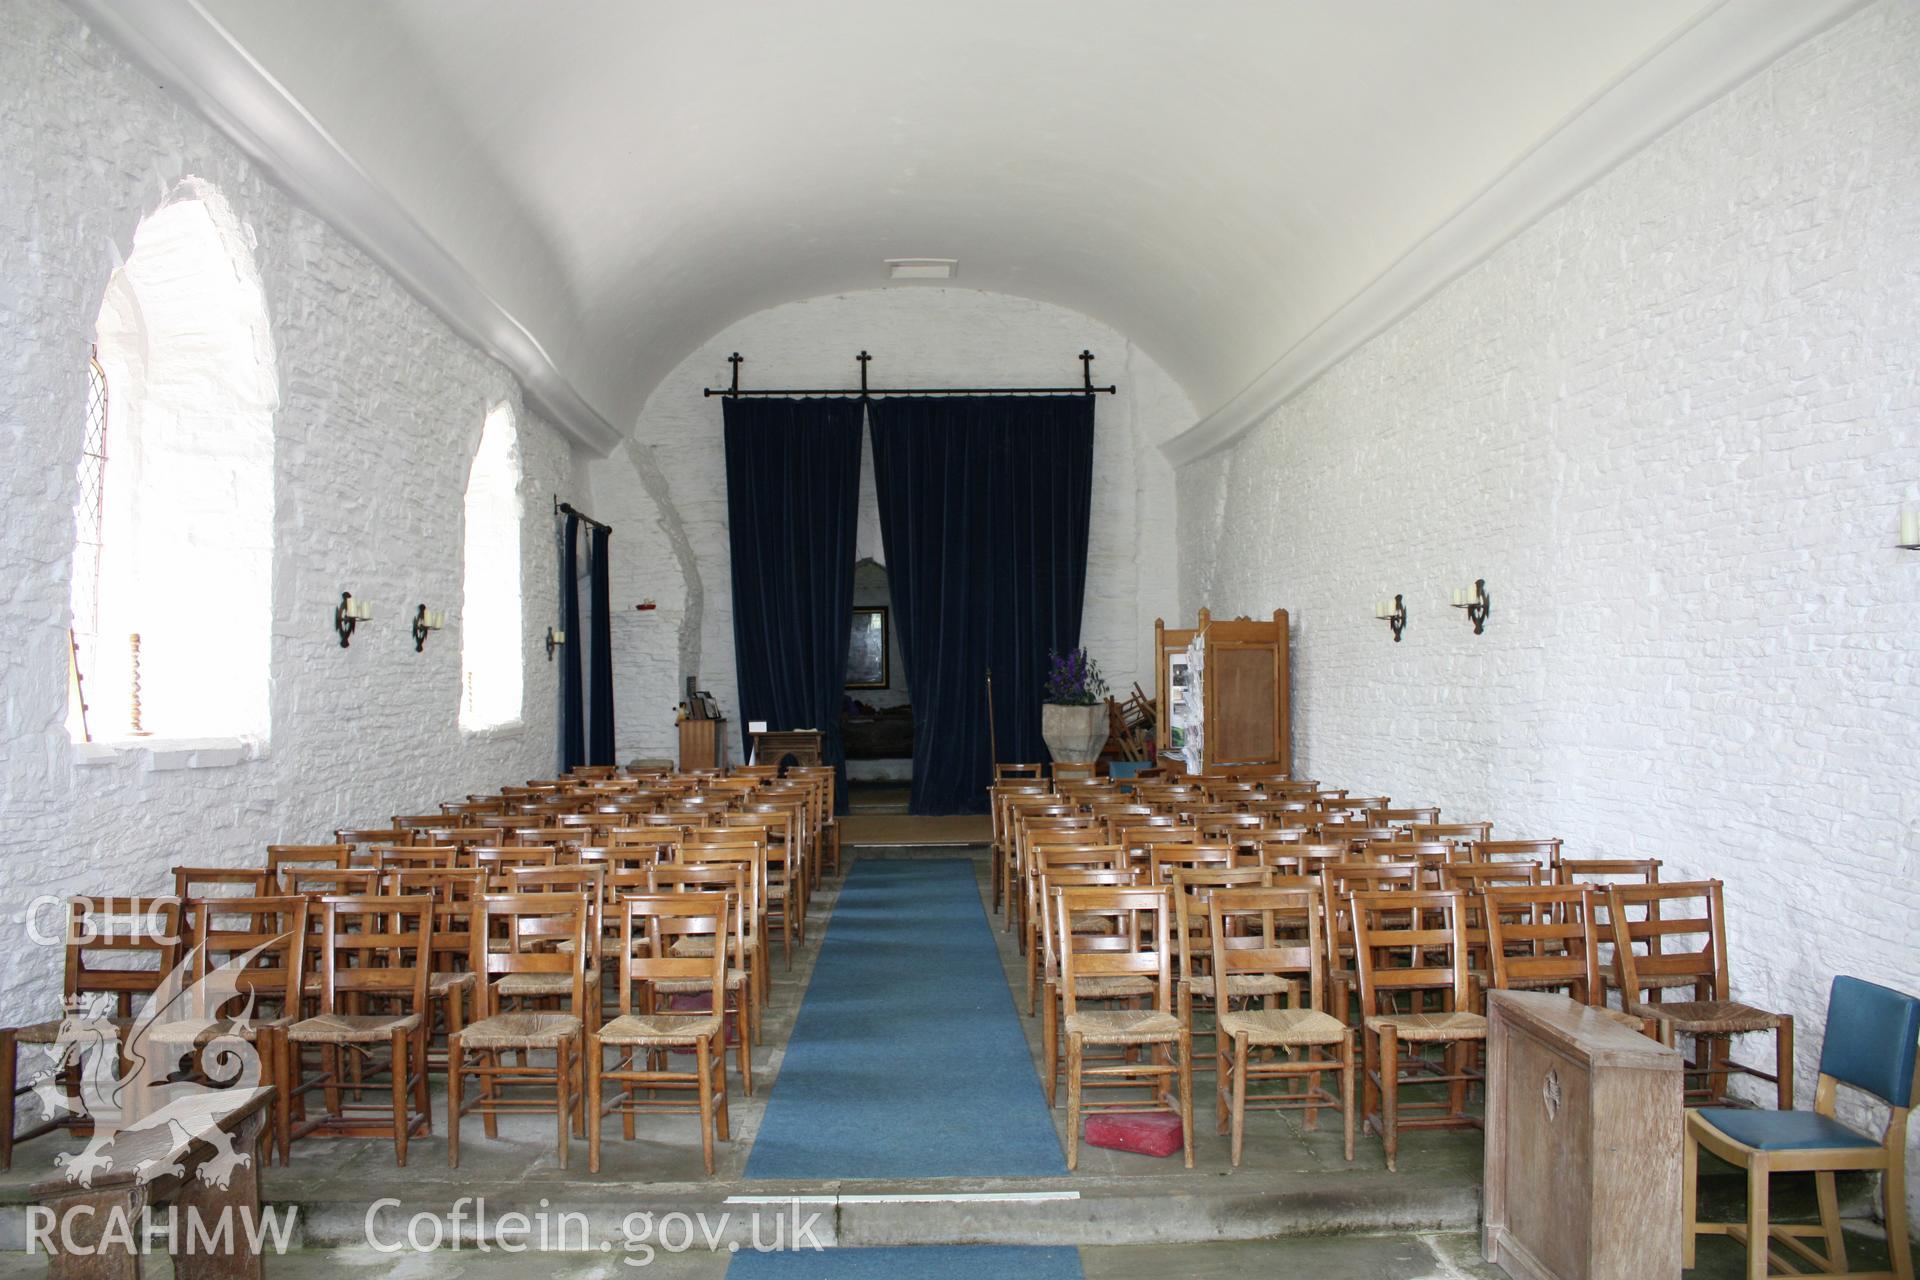 St Mary's Church, Pilleth. Interior view of the nave and tower.